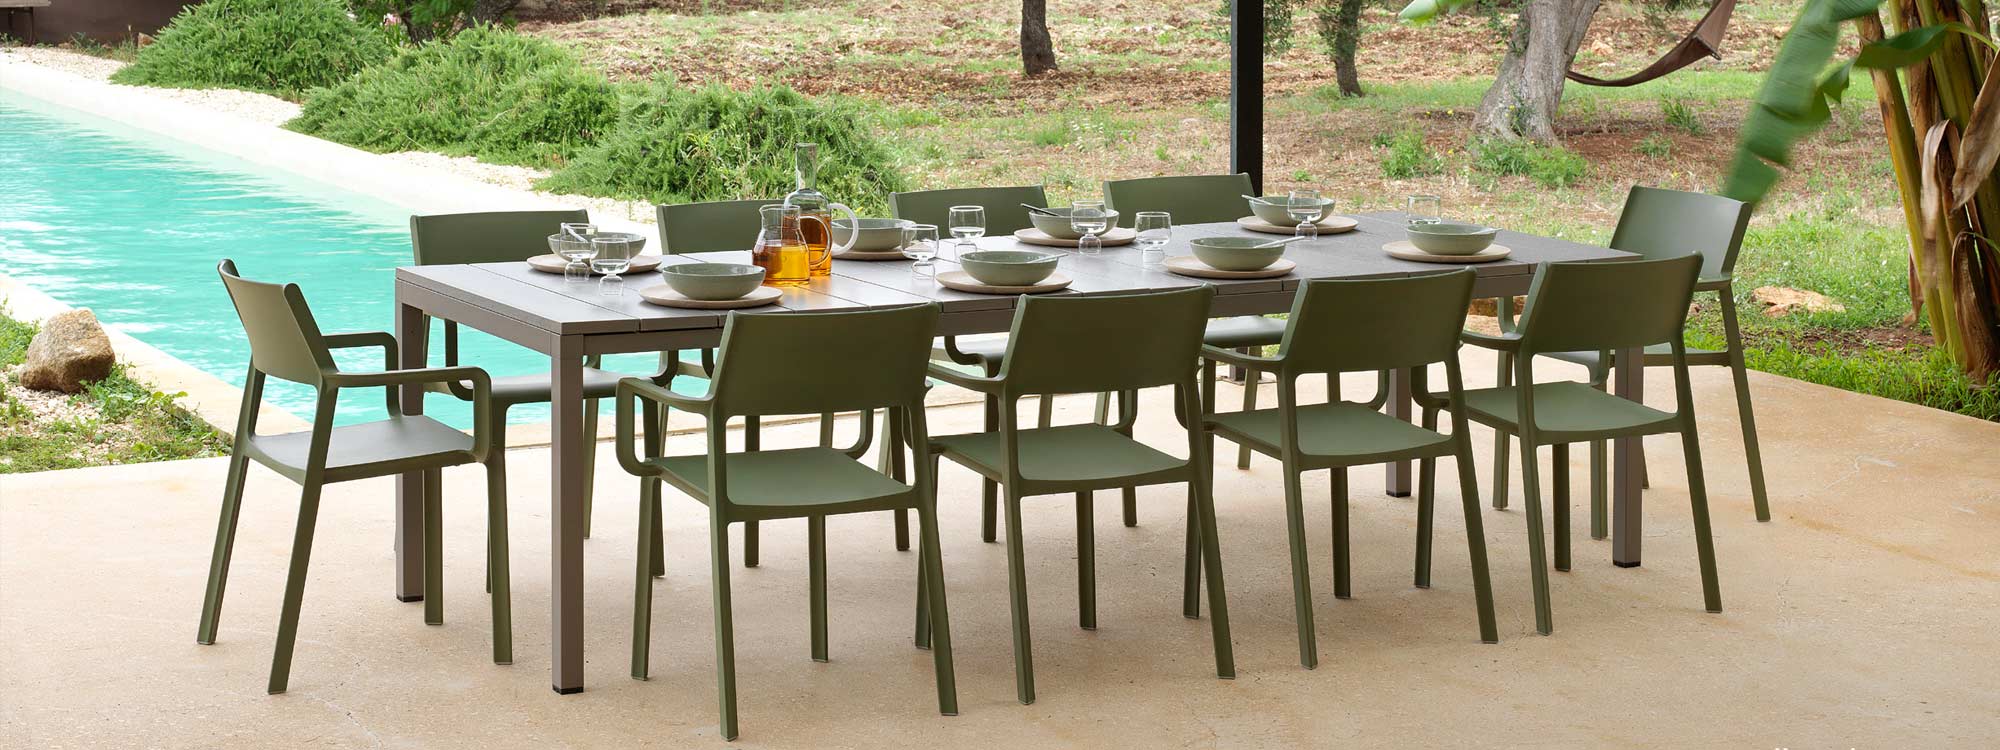 Image of Trill stacking outdoor contract chair and Rio modern outdoor table by Nardi